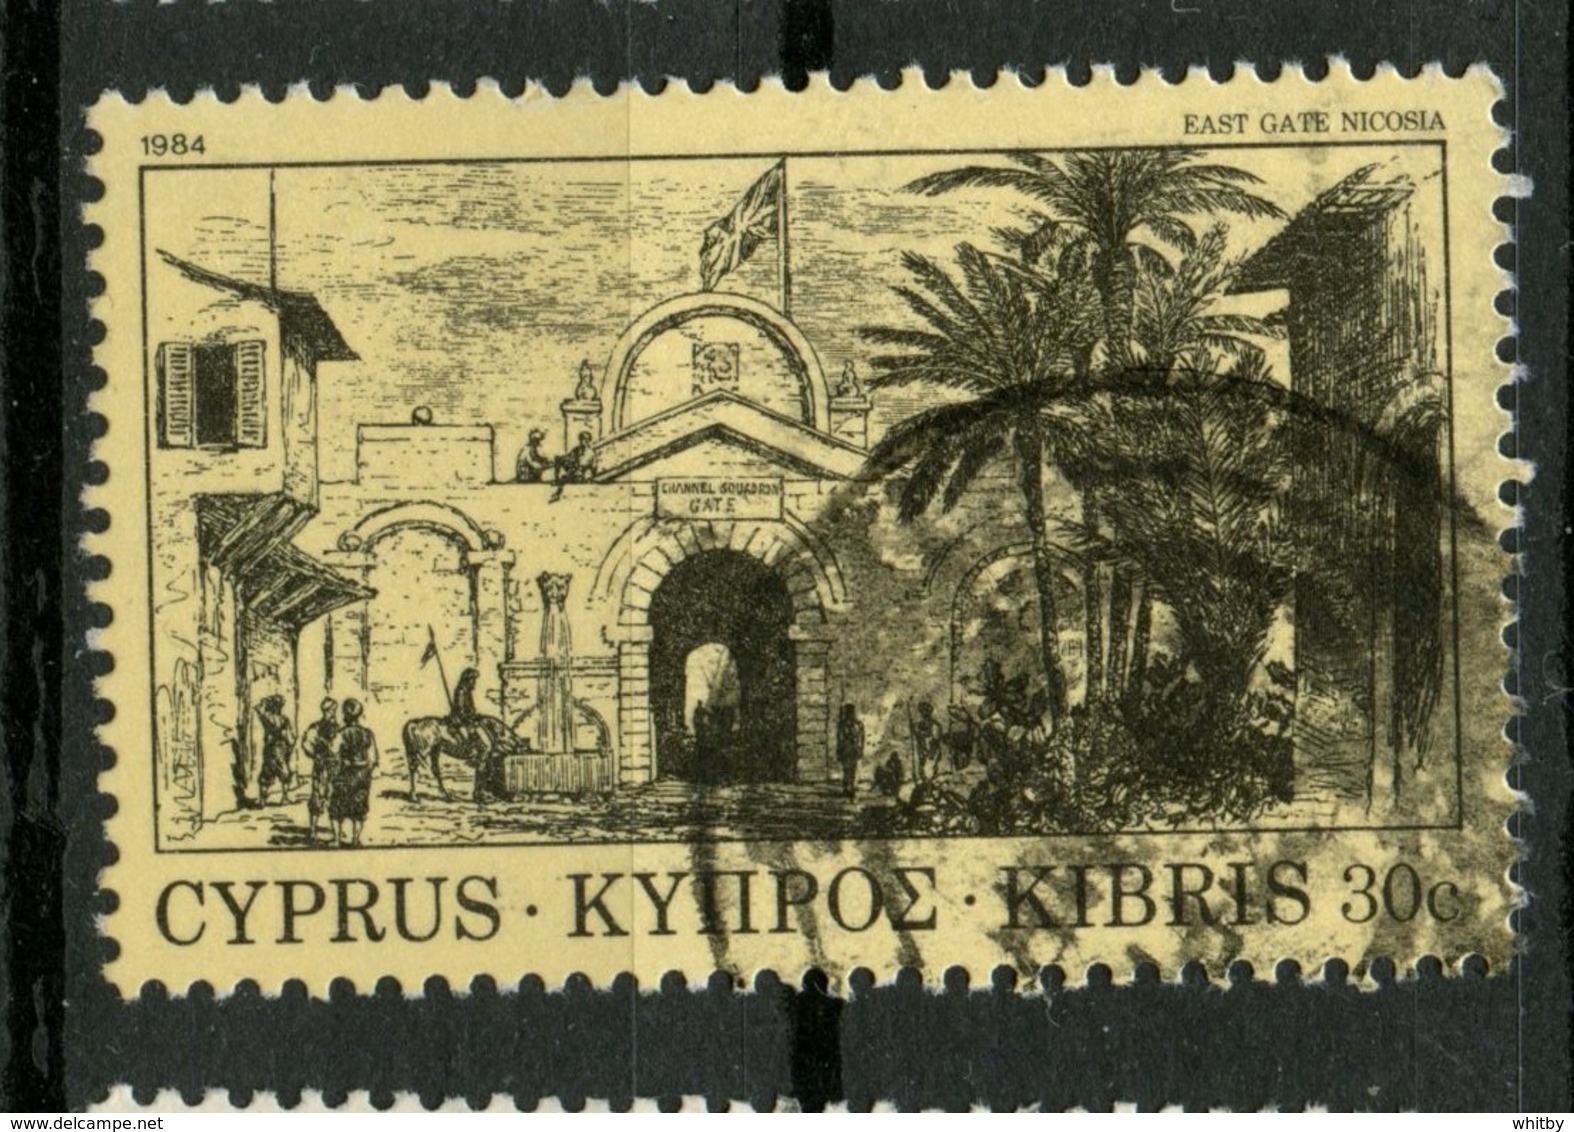 Cyprus1984 30c East Gate Issue #623 - Used Stamps